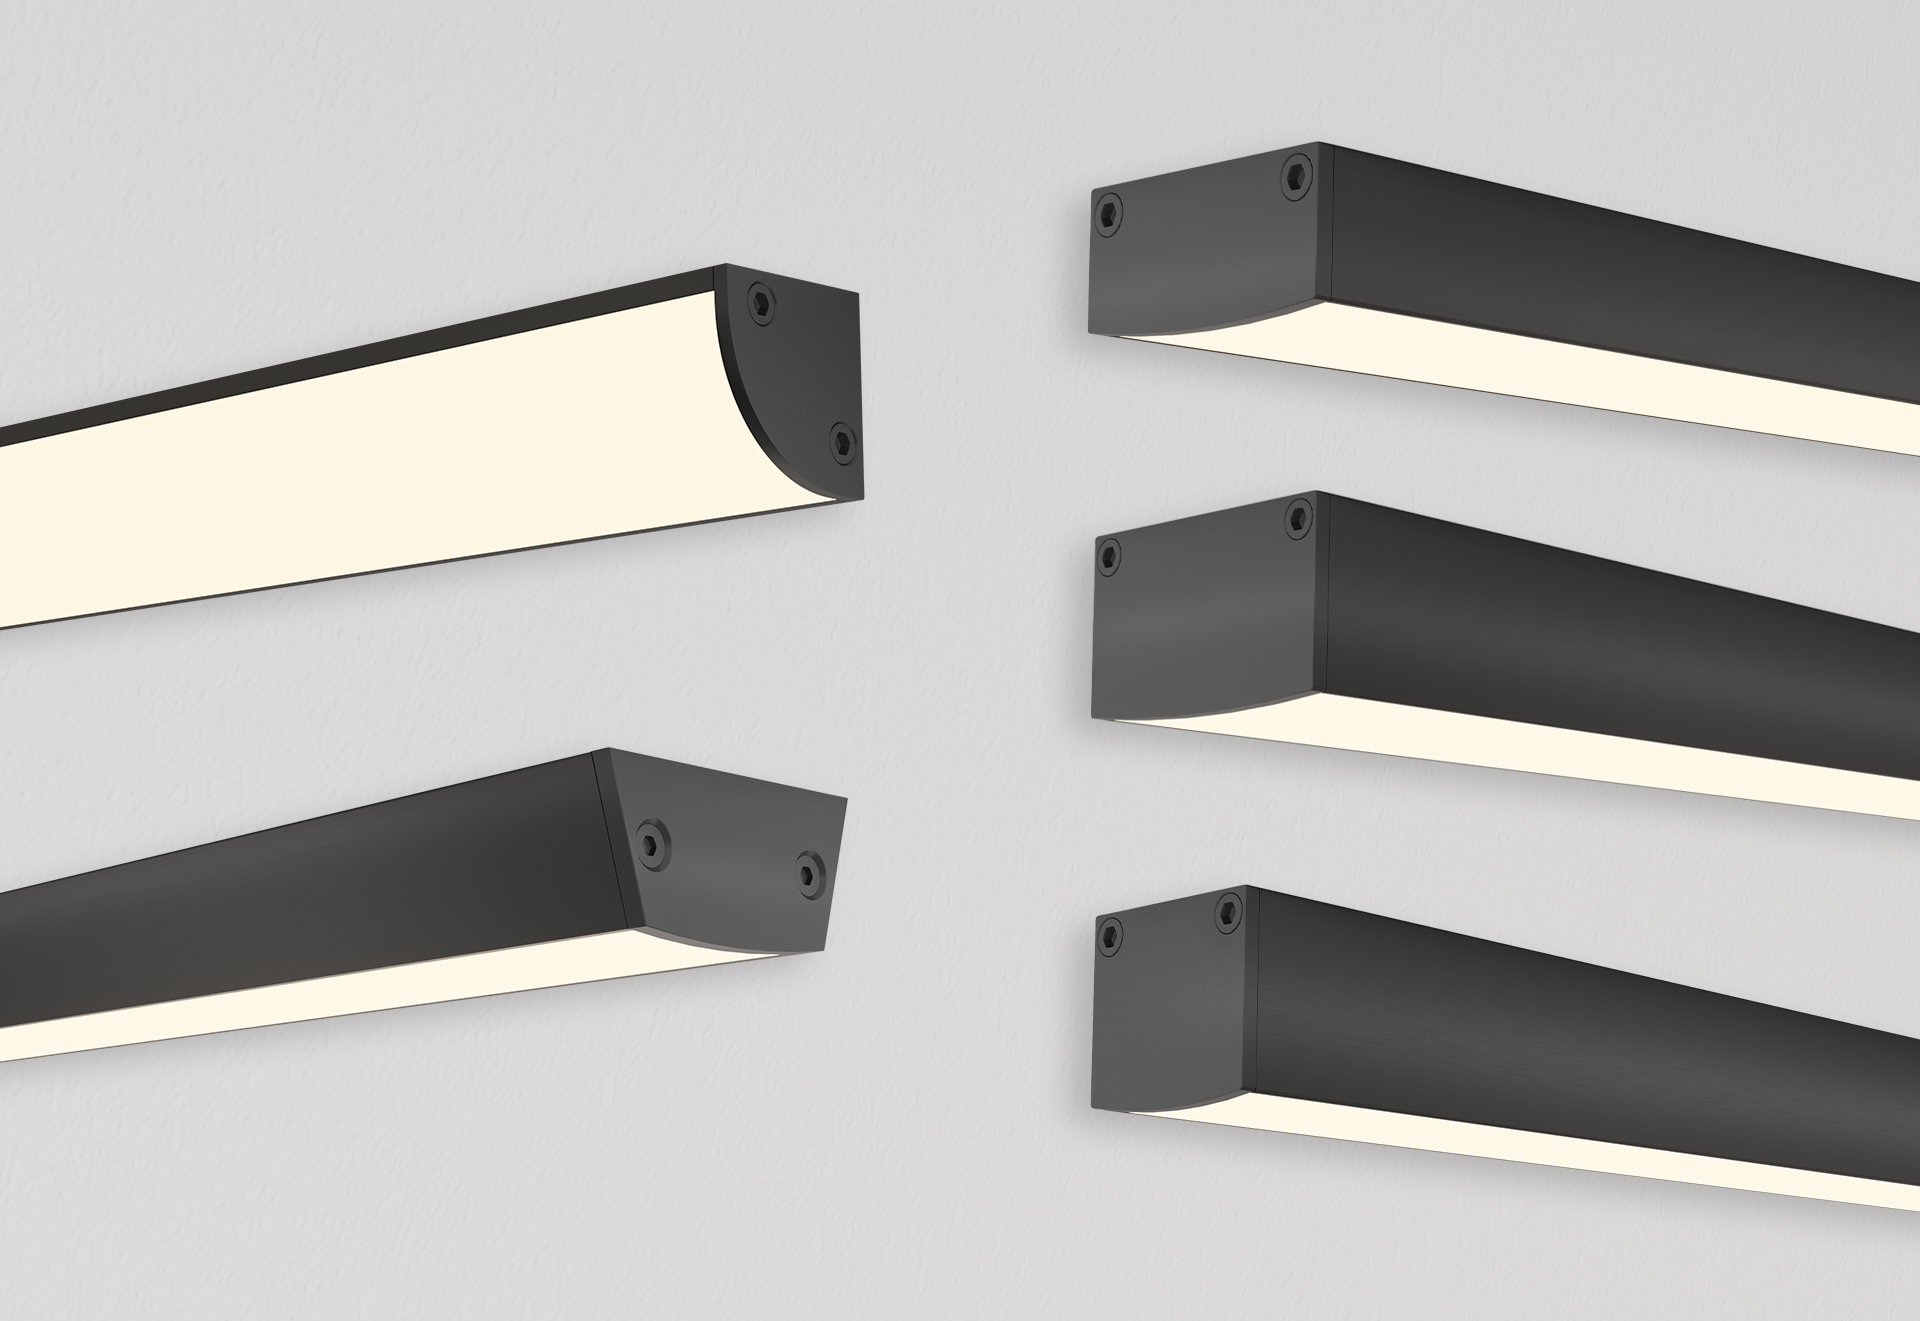 Optique Lighting Launches Architectural Nano Linear Luminaires - Electrical  Products & Solutions